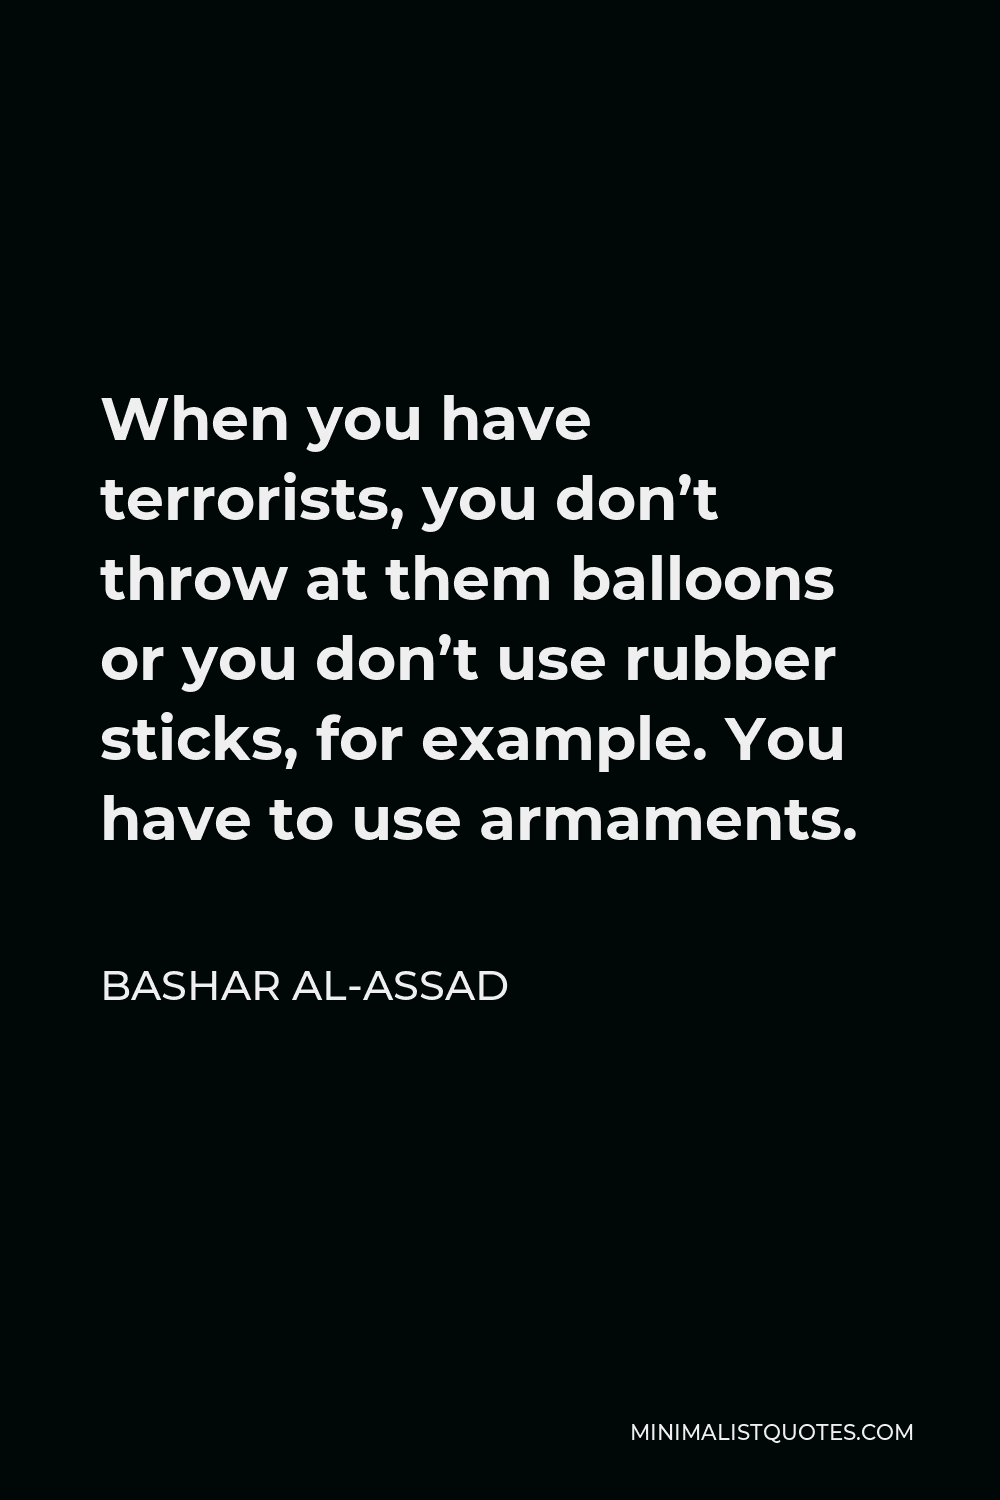 Bashar al-Assad Quote - When you have terrorists, you don’t throw at them balloons or you don’t use rubber sticks, for example. You have to use armaments.